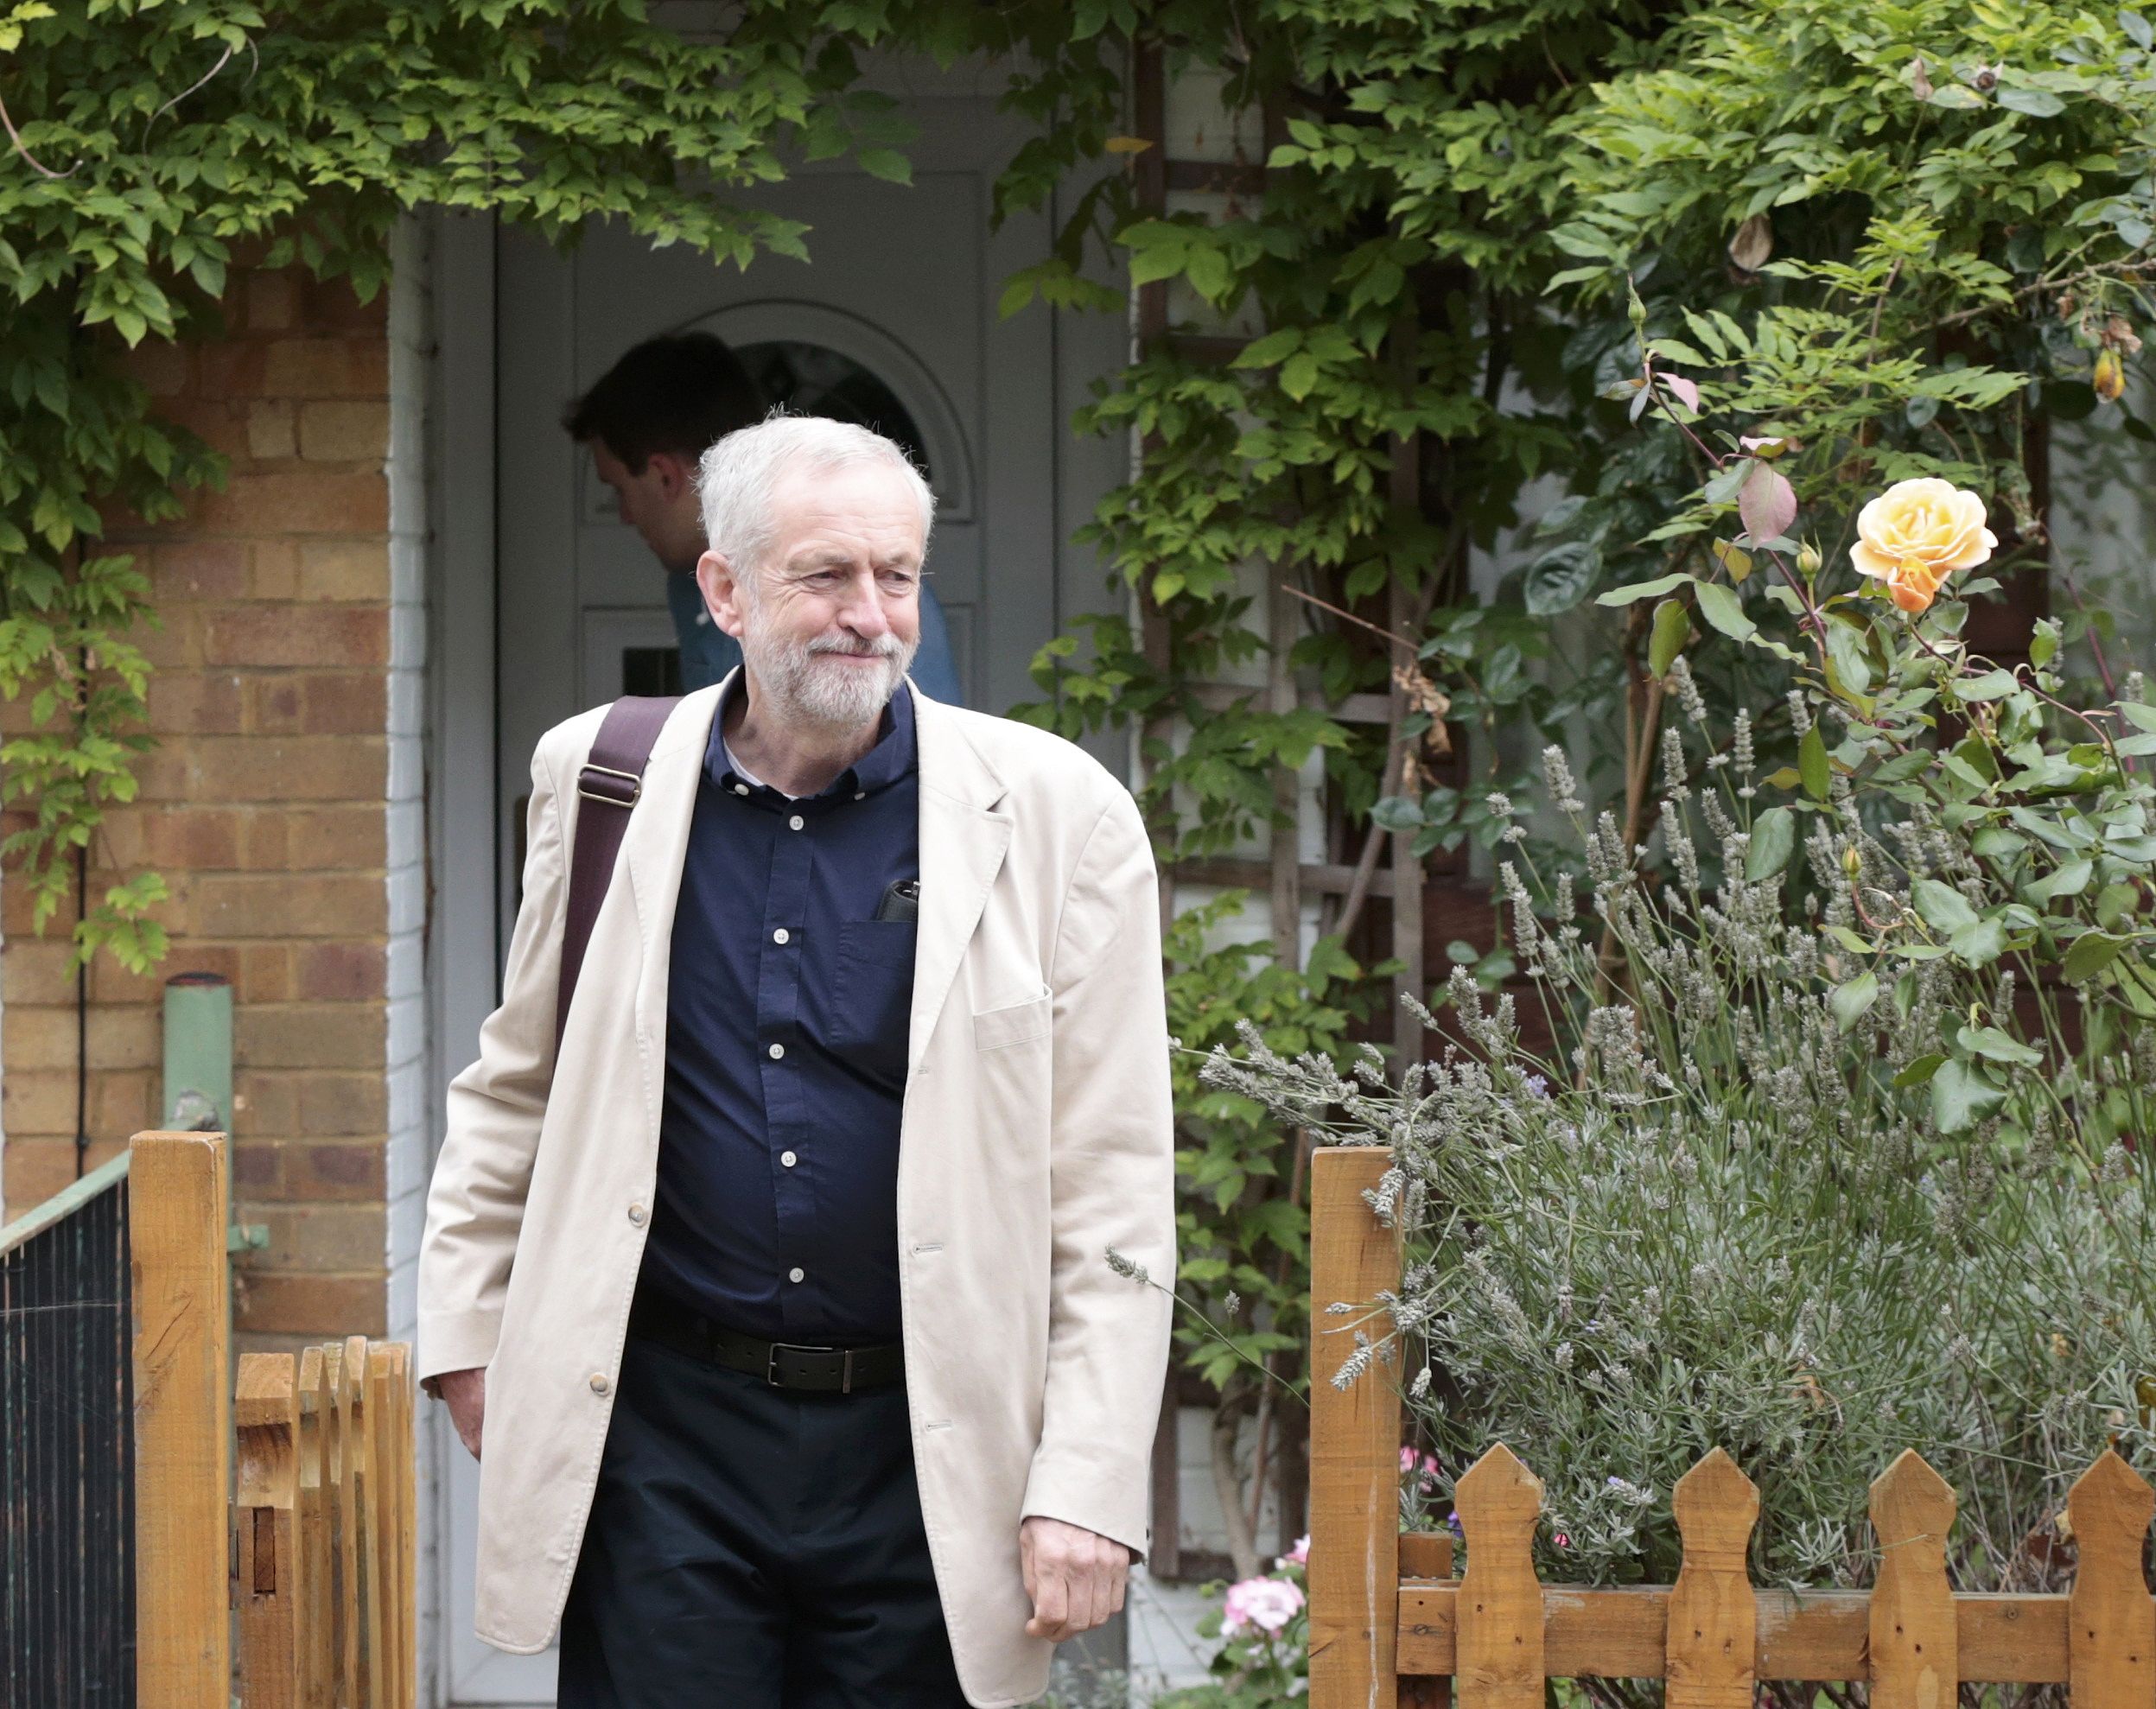 Jeremy Corbyn leaves his home the morning after being elected as the new leader of Britain's opposition Labour Party, in London, September 13, 2015.